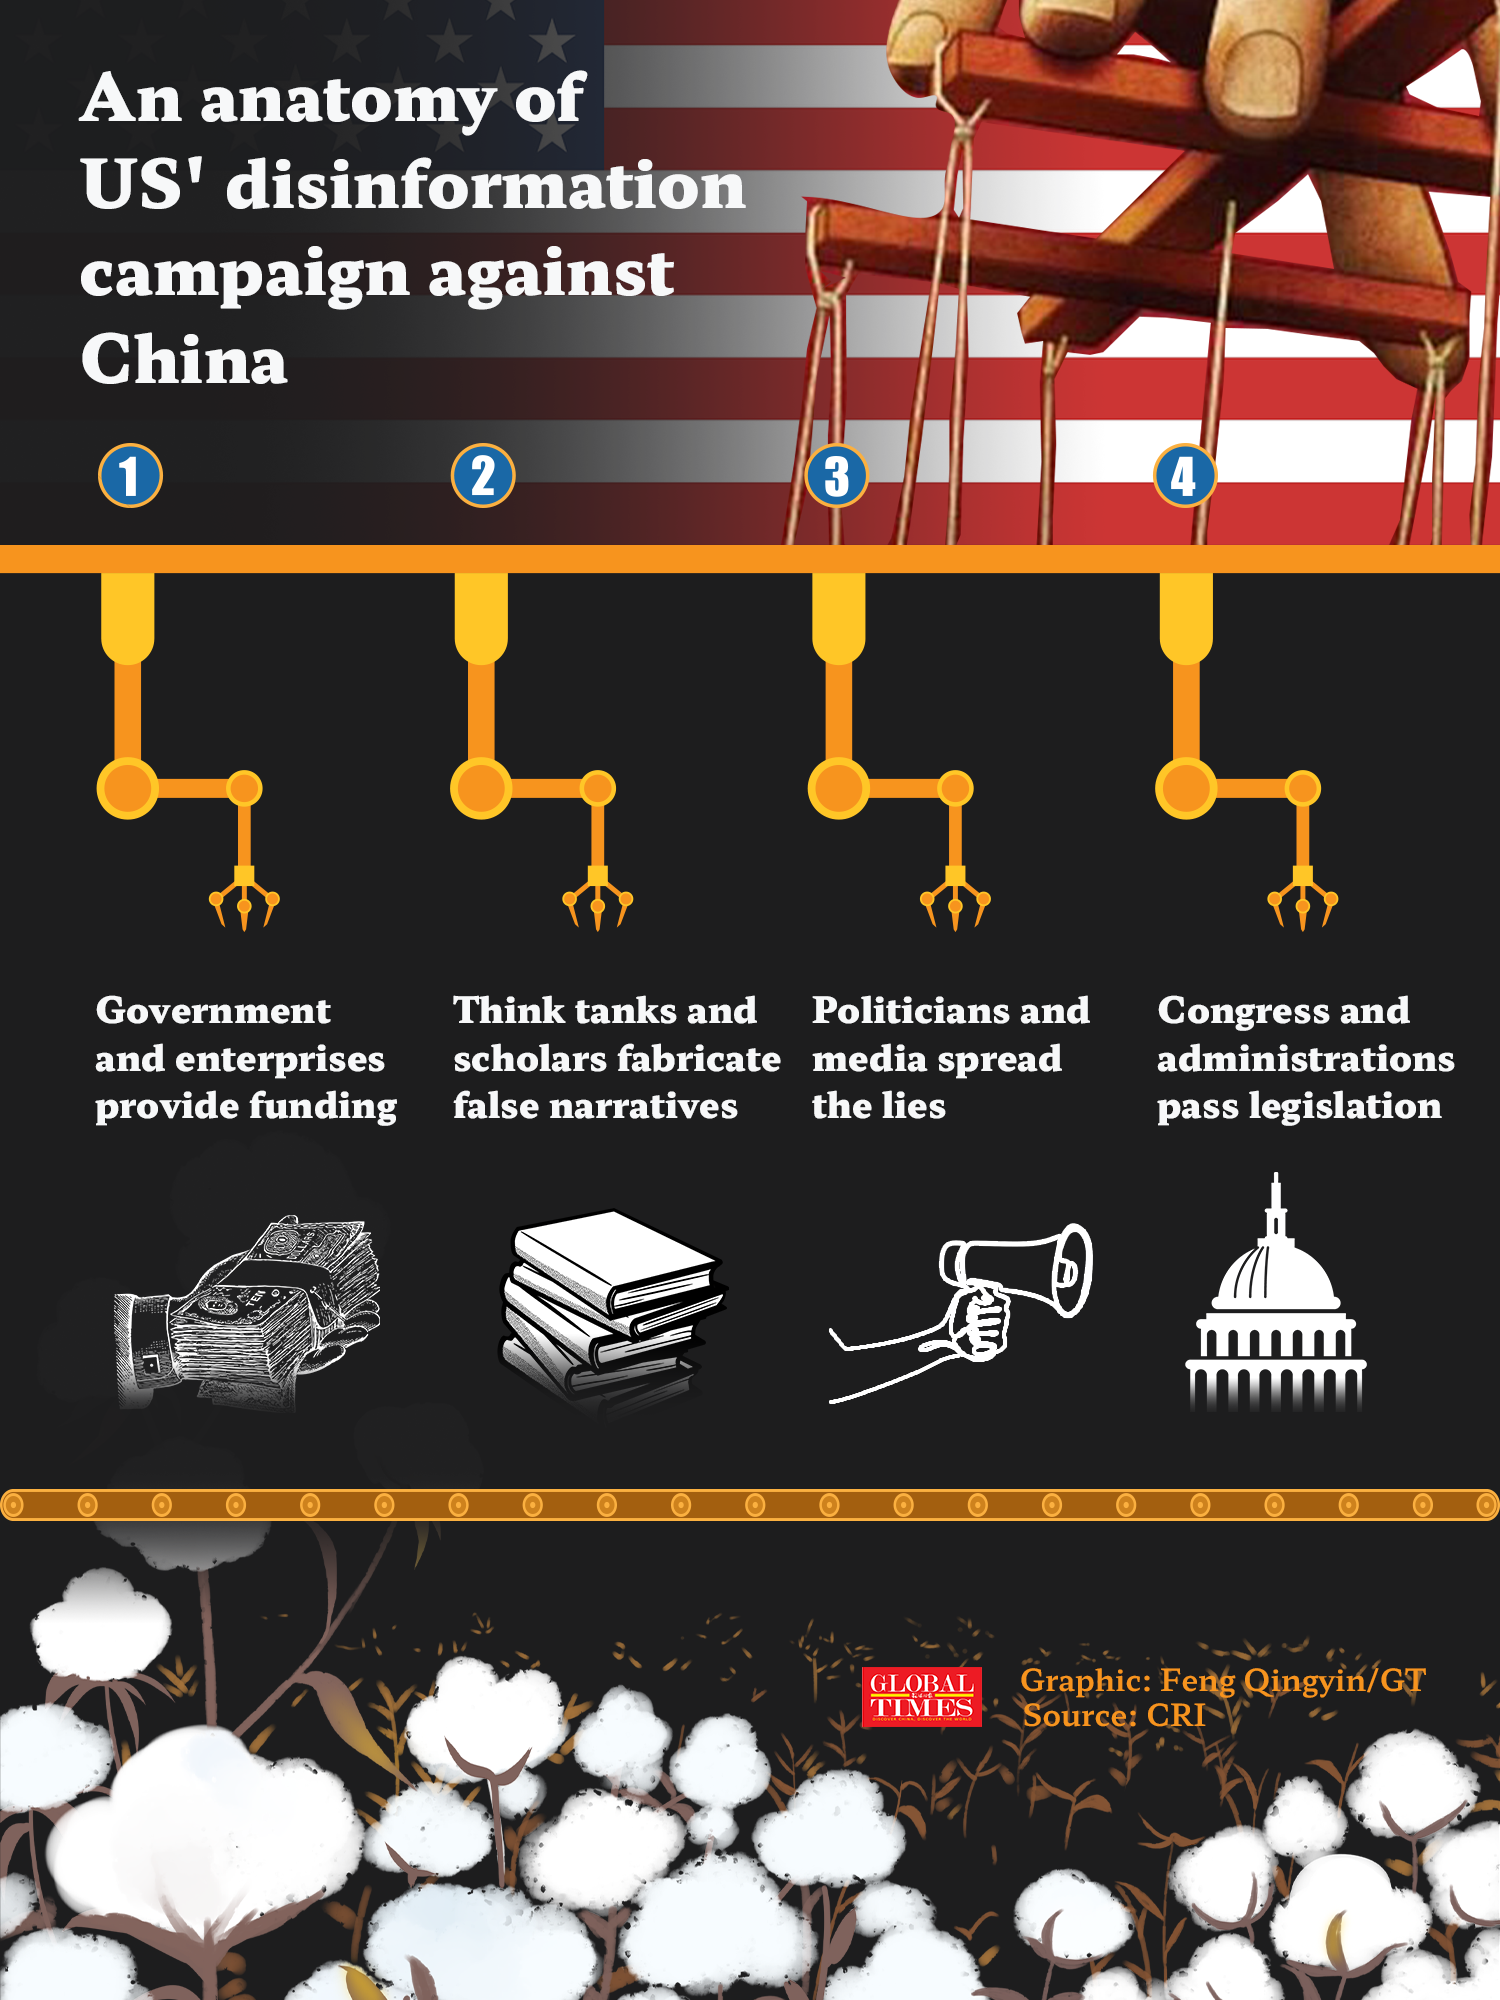 The graphic shows a four-step scheme of US’ malicious slander against China. From govt, think thanks to the media, US’ disinformation machines fabricate lies and pave the way for legislation that aims to contain China. Graphic: Feng Qingyin/GT